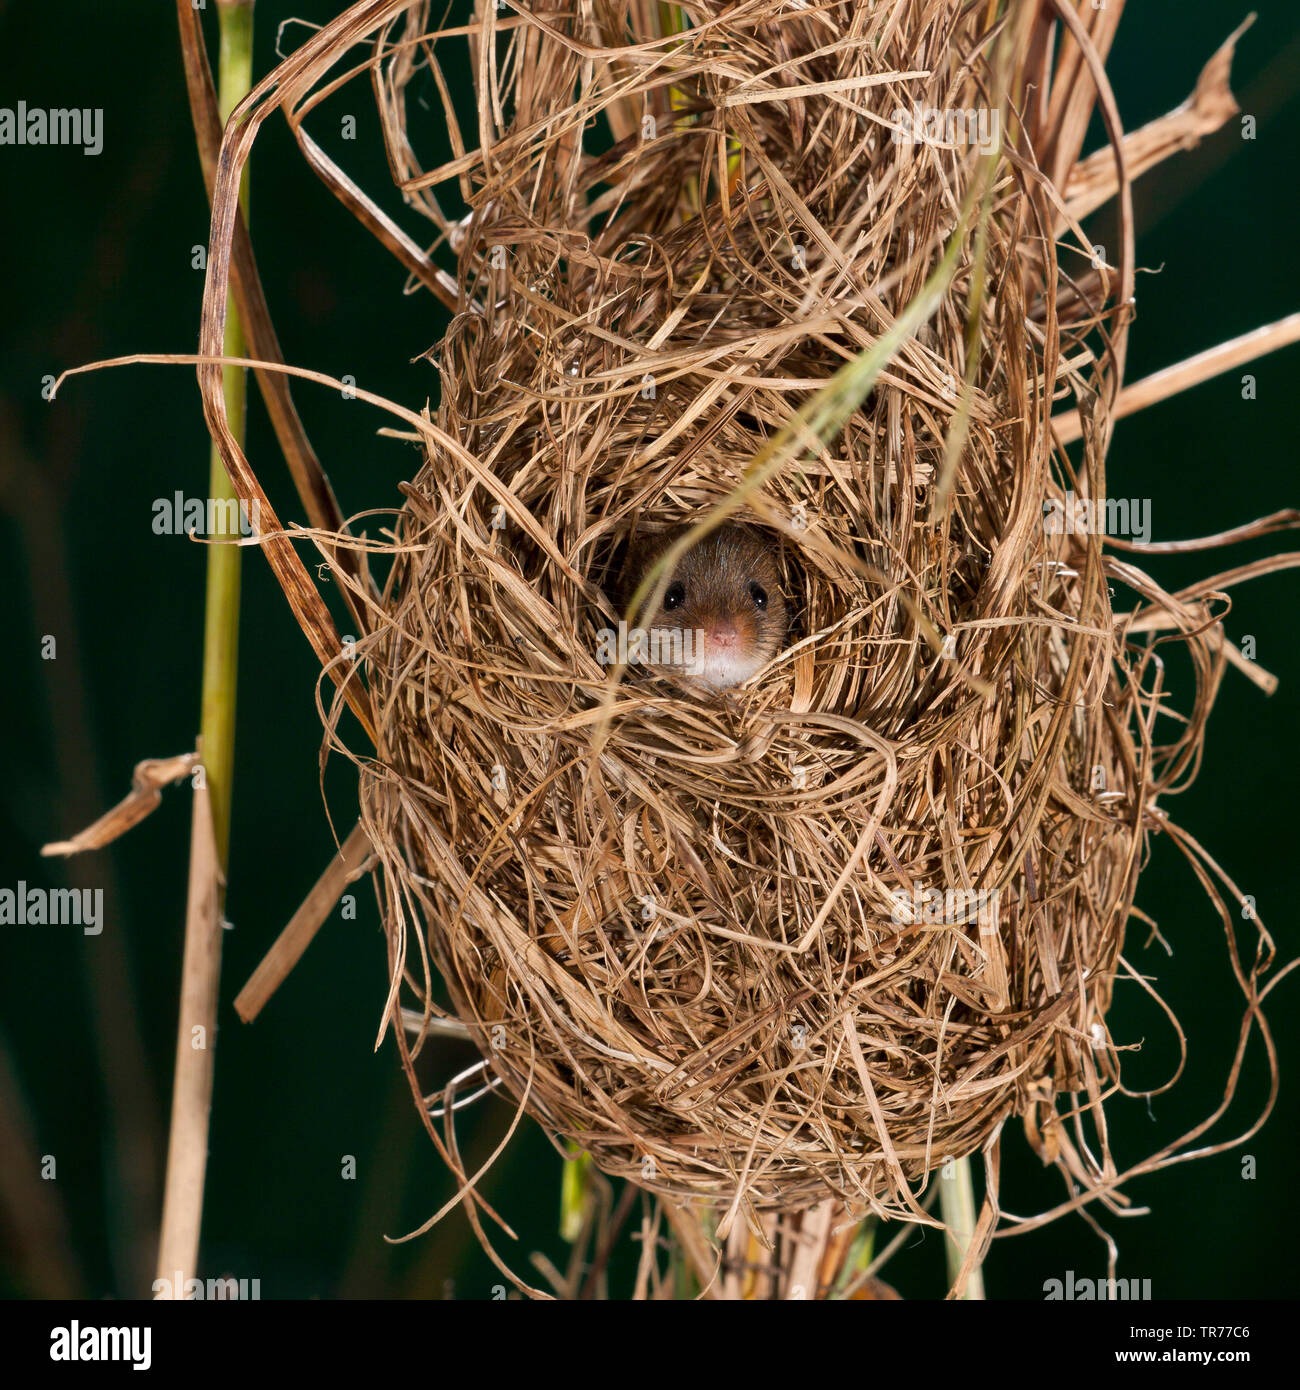 Old World harvest mouse (Micromys minutus), looking out of a nest at night, Netherlands Stock Photo